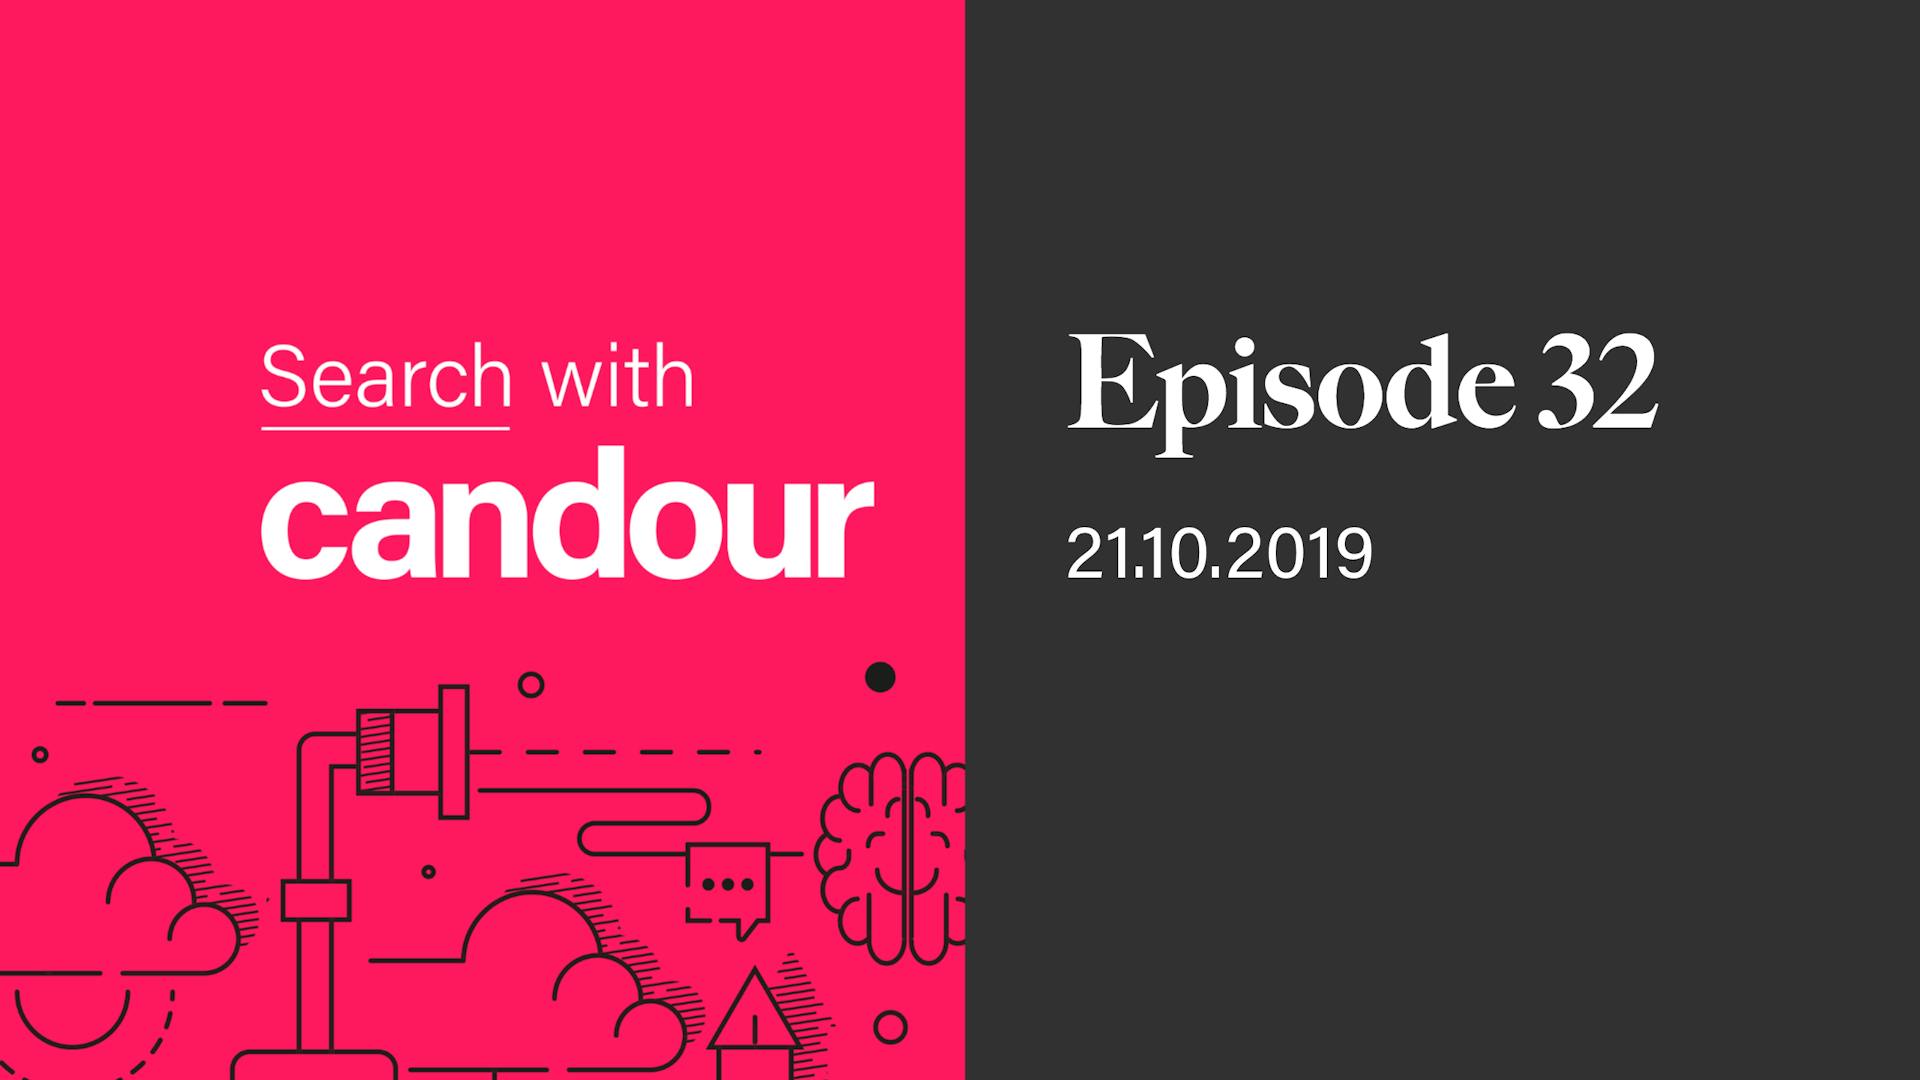 Search with Candour episode 32